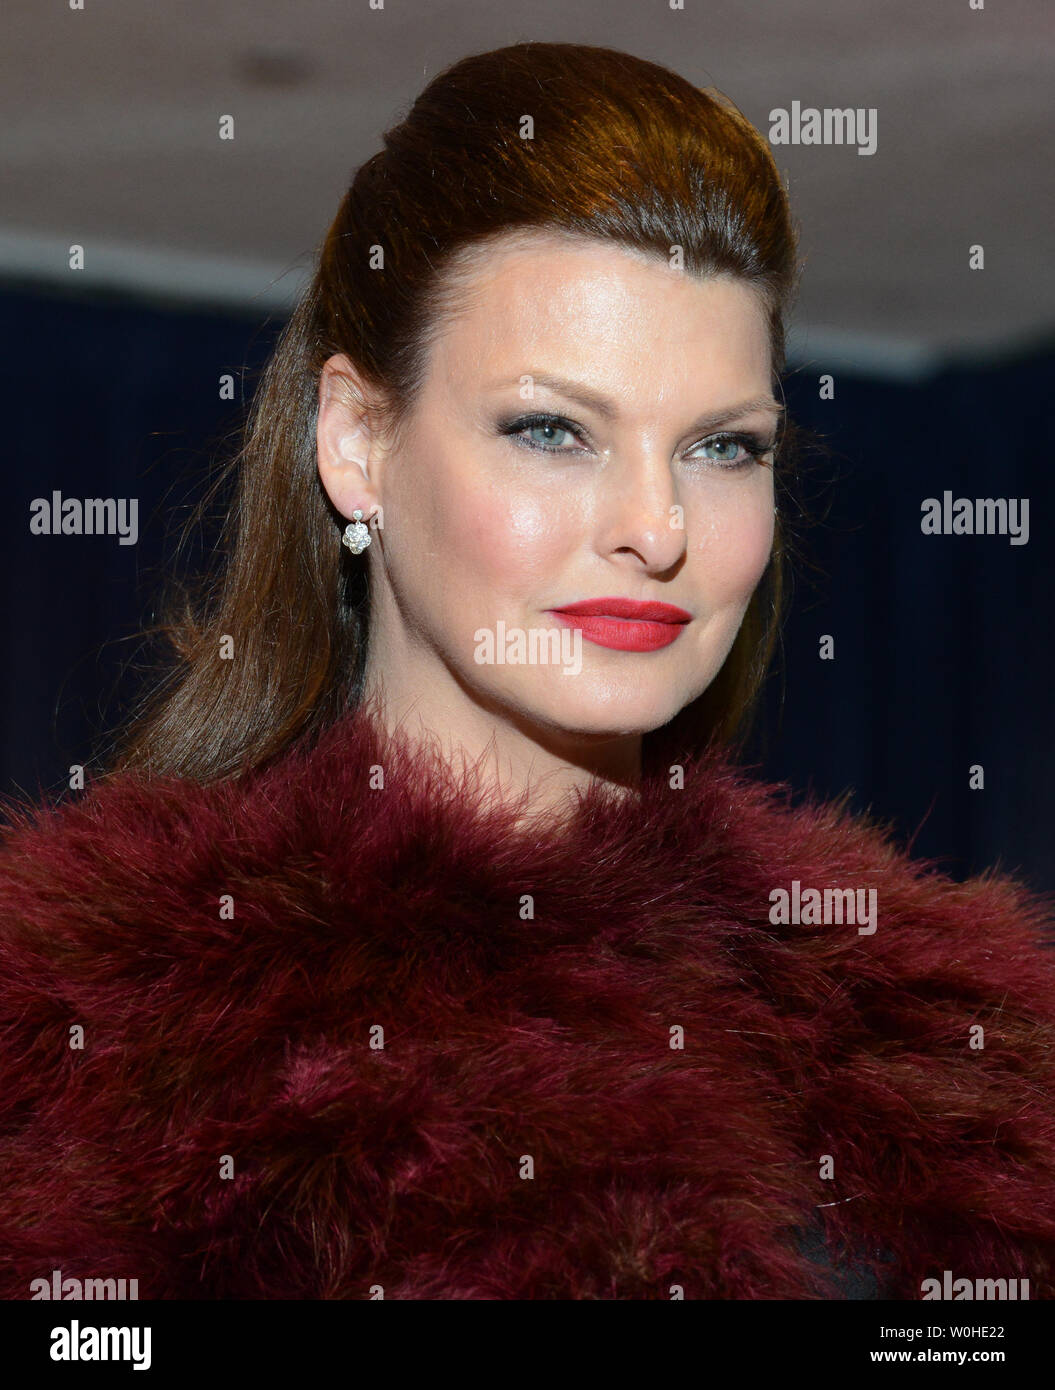 Model Linda Evangelista arrives on the red carpet at the White House Correspondents' Association Dinner at the Washington Hilton in Washington, DC on May 3, 2014. UPI/Molly Riley Stock Photo